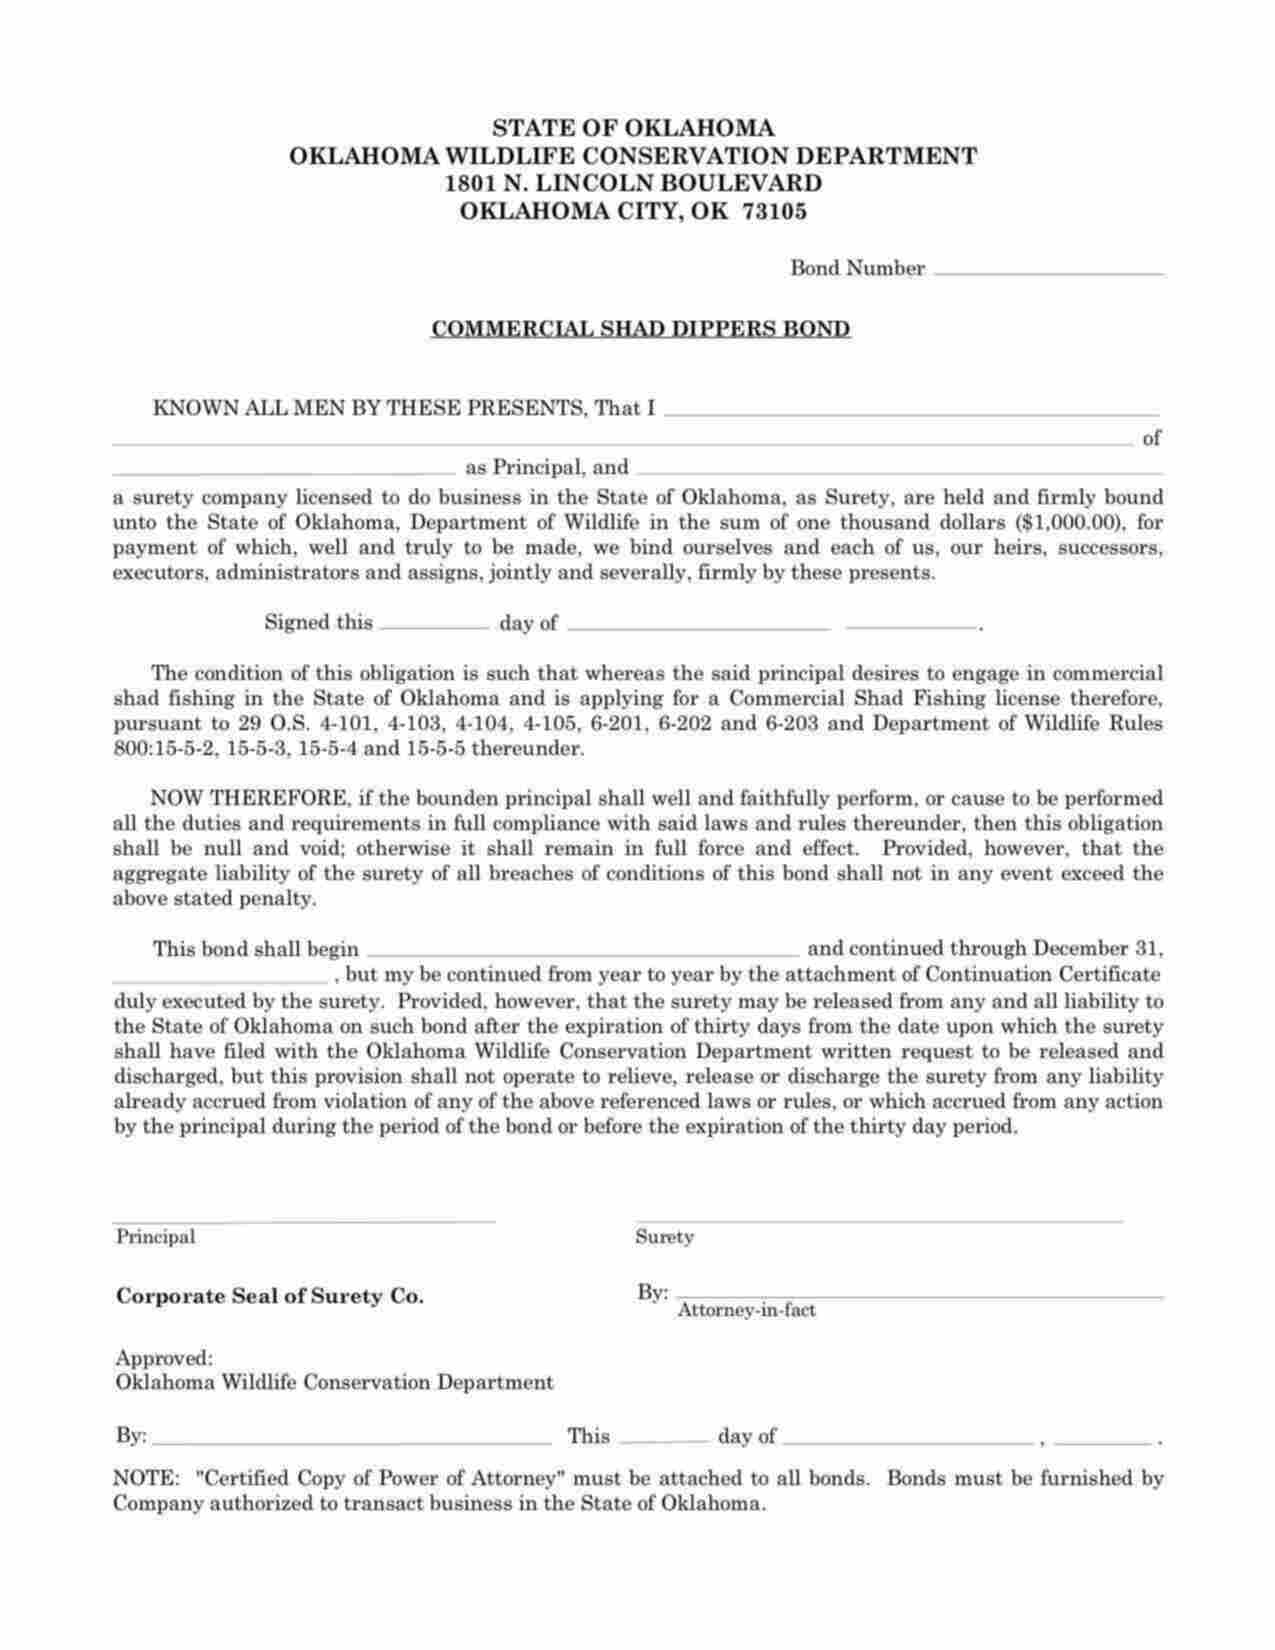 Oklahoma Commercial Shad Dippers Bond Form